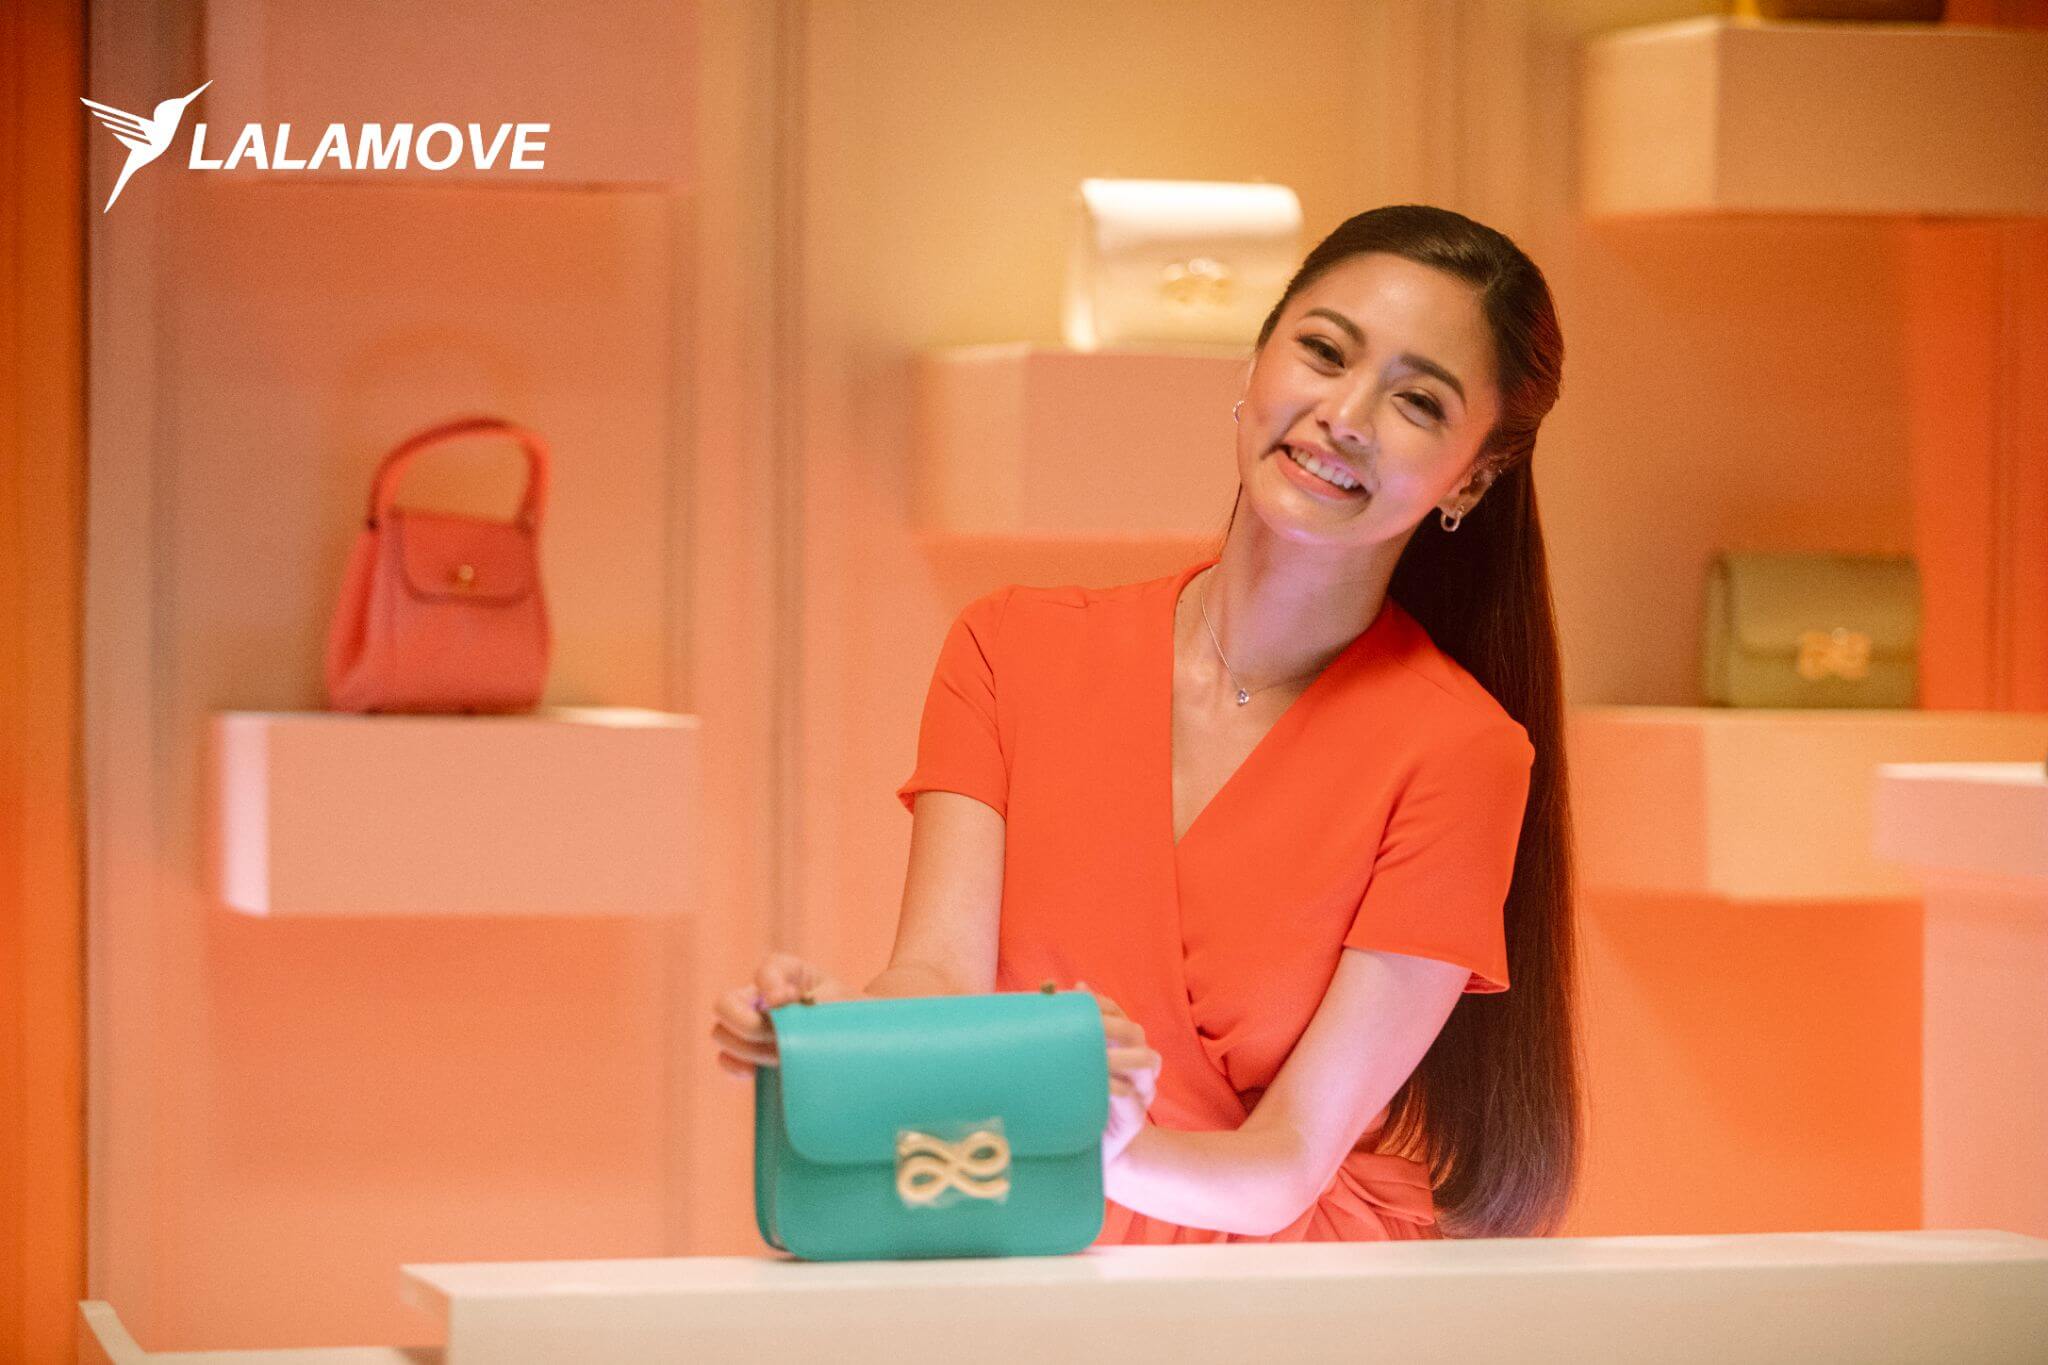 Kim Chiu Just Launched A Bag Brand And Here's What We Know!